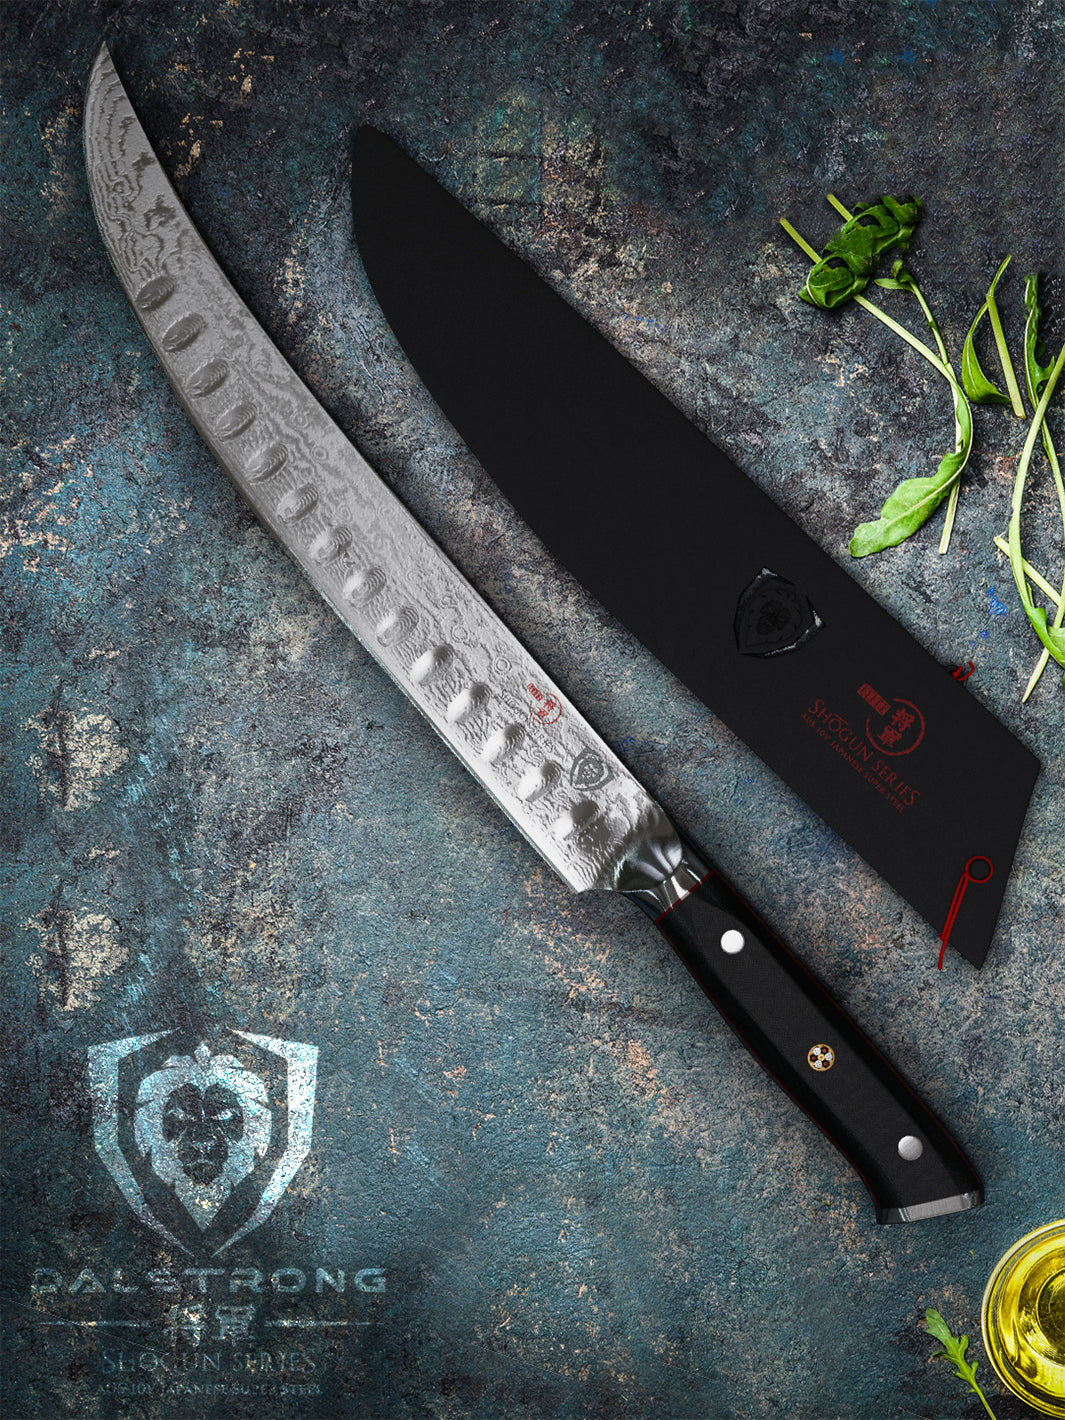 Dalstrong Bull Nose Butcher Knife - 10 - Shogun Series - Japanese AUS-10V Super Steel - Vacuum Heat Treatment - with Sheath - Meat, BBQ, Breaking